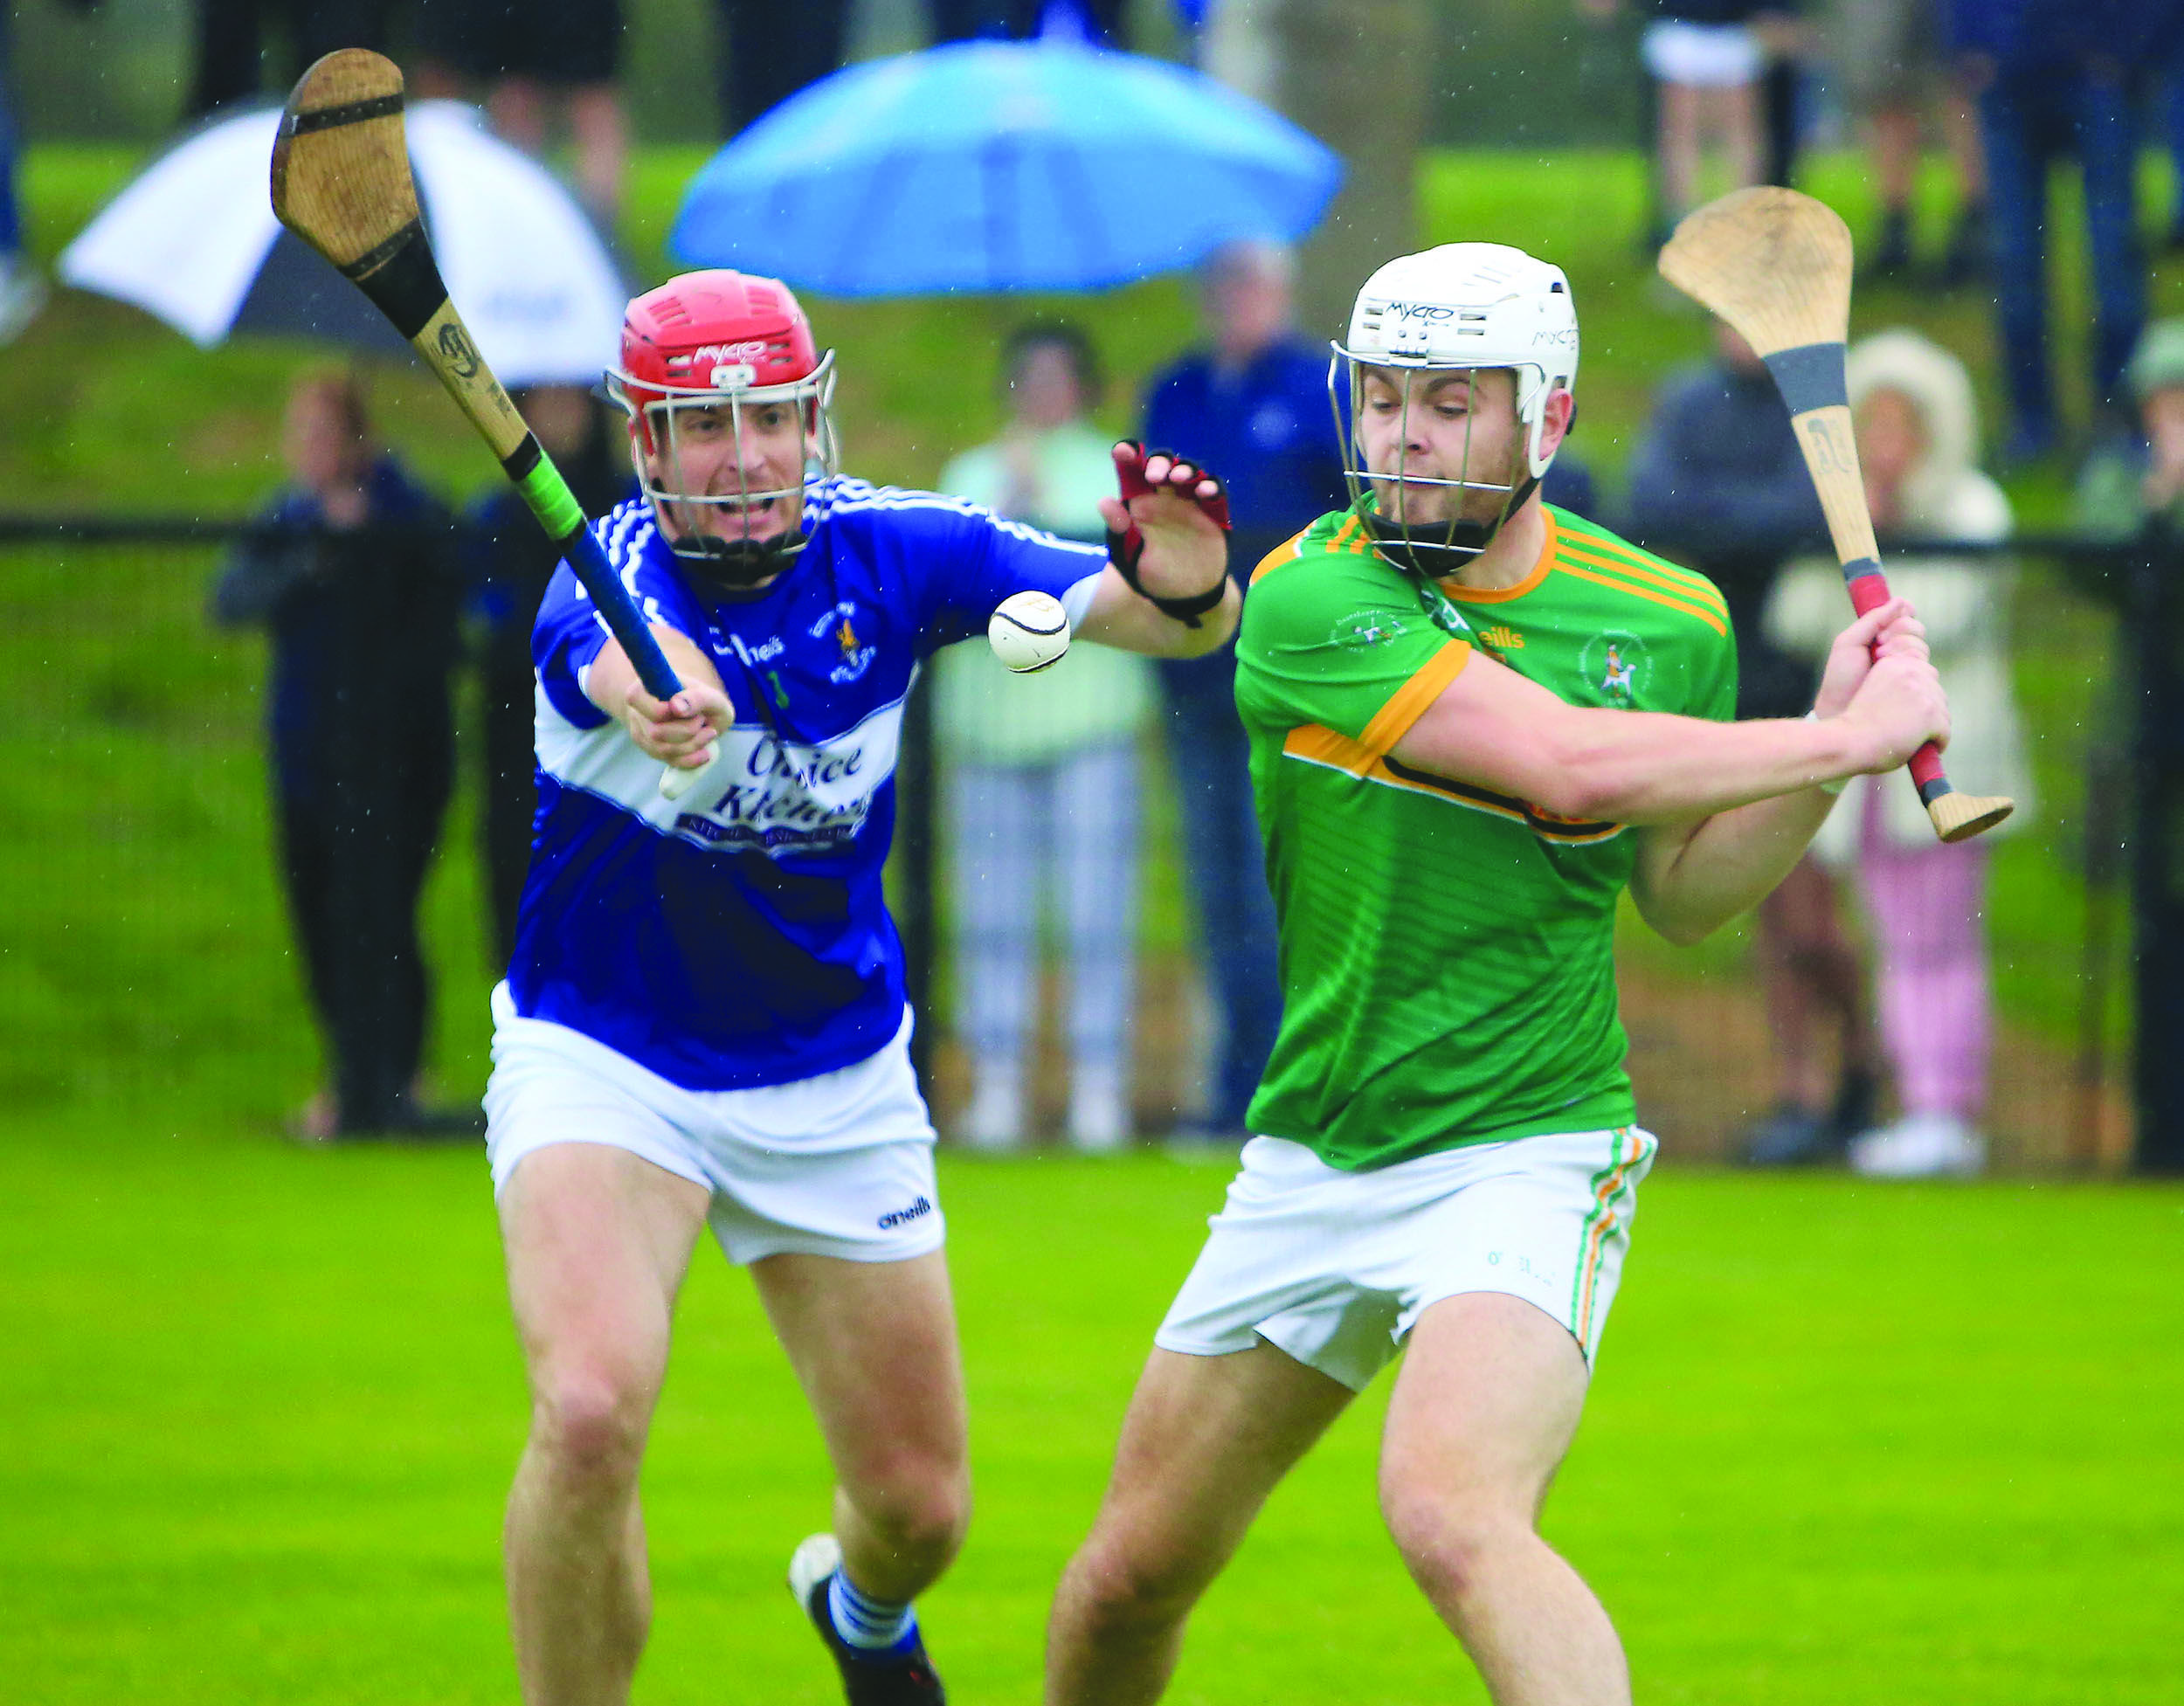 Ryan McNulty attempts to block down Ronan Molloy during last year’s semi-final meeting between St John’s and Dunloy at a sodden Dunsilly that the Cuchullains won with the help of Keelan Molloy’s 51st minute goal that finally ended the challenge of the 14-